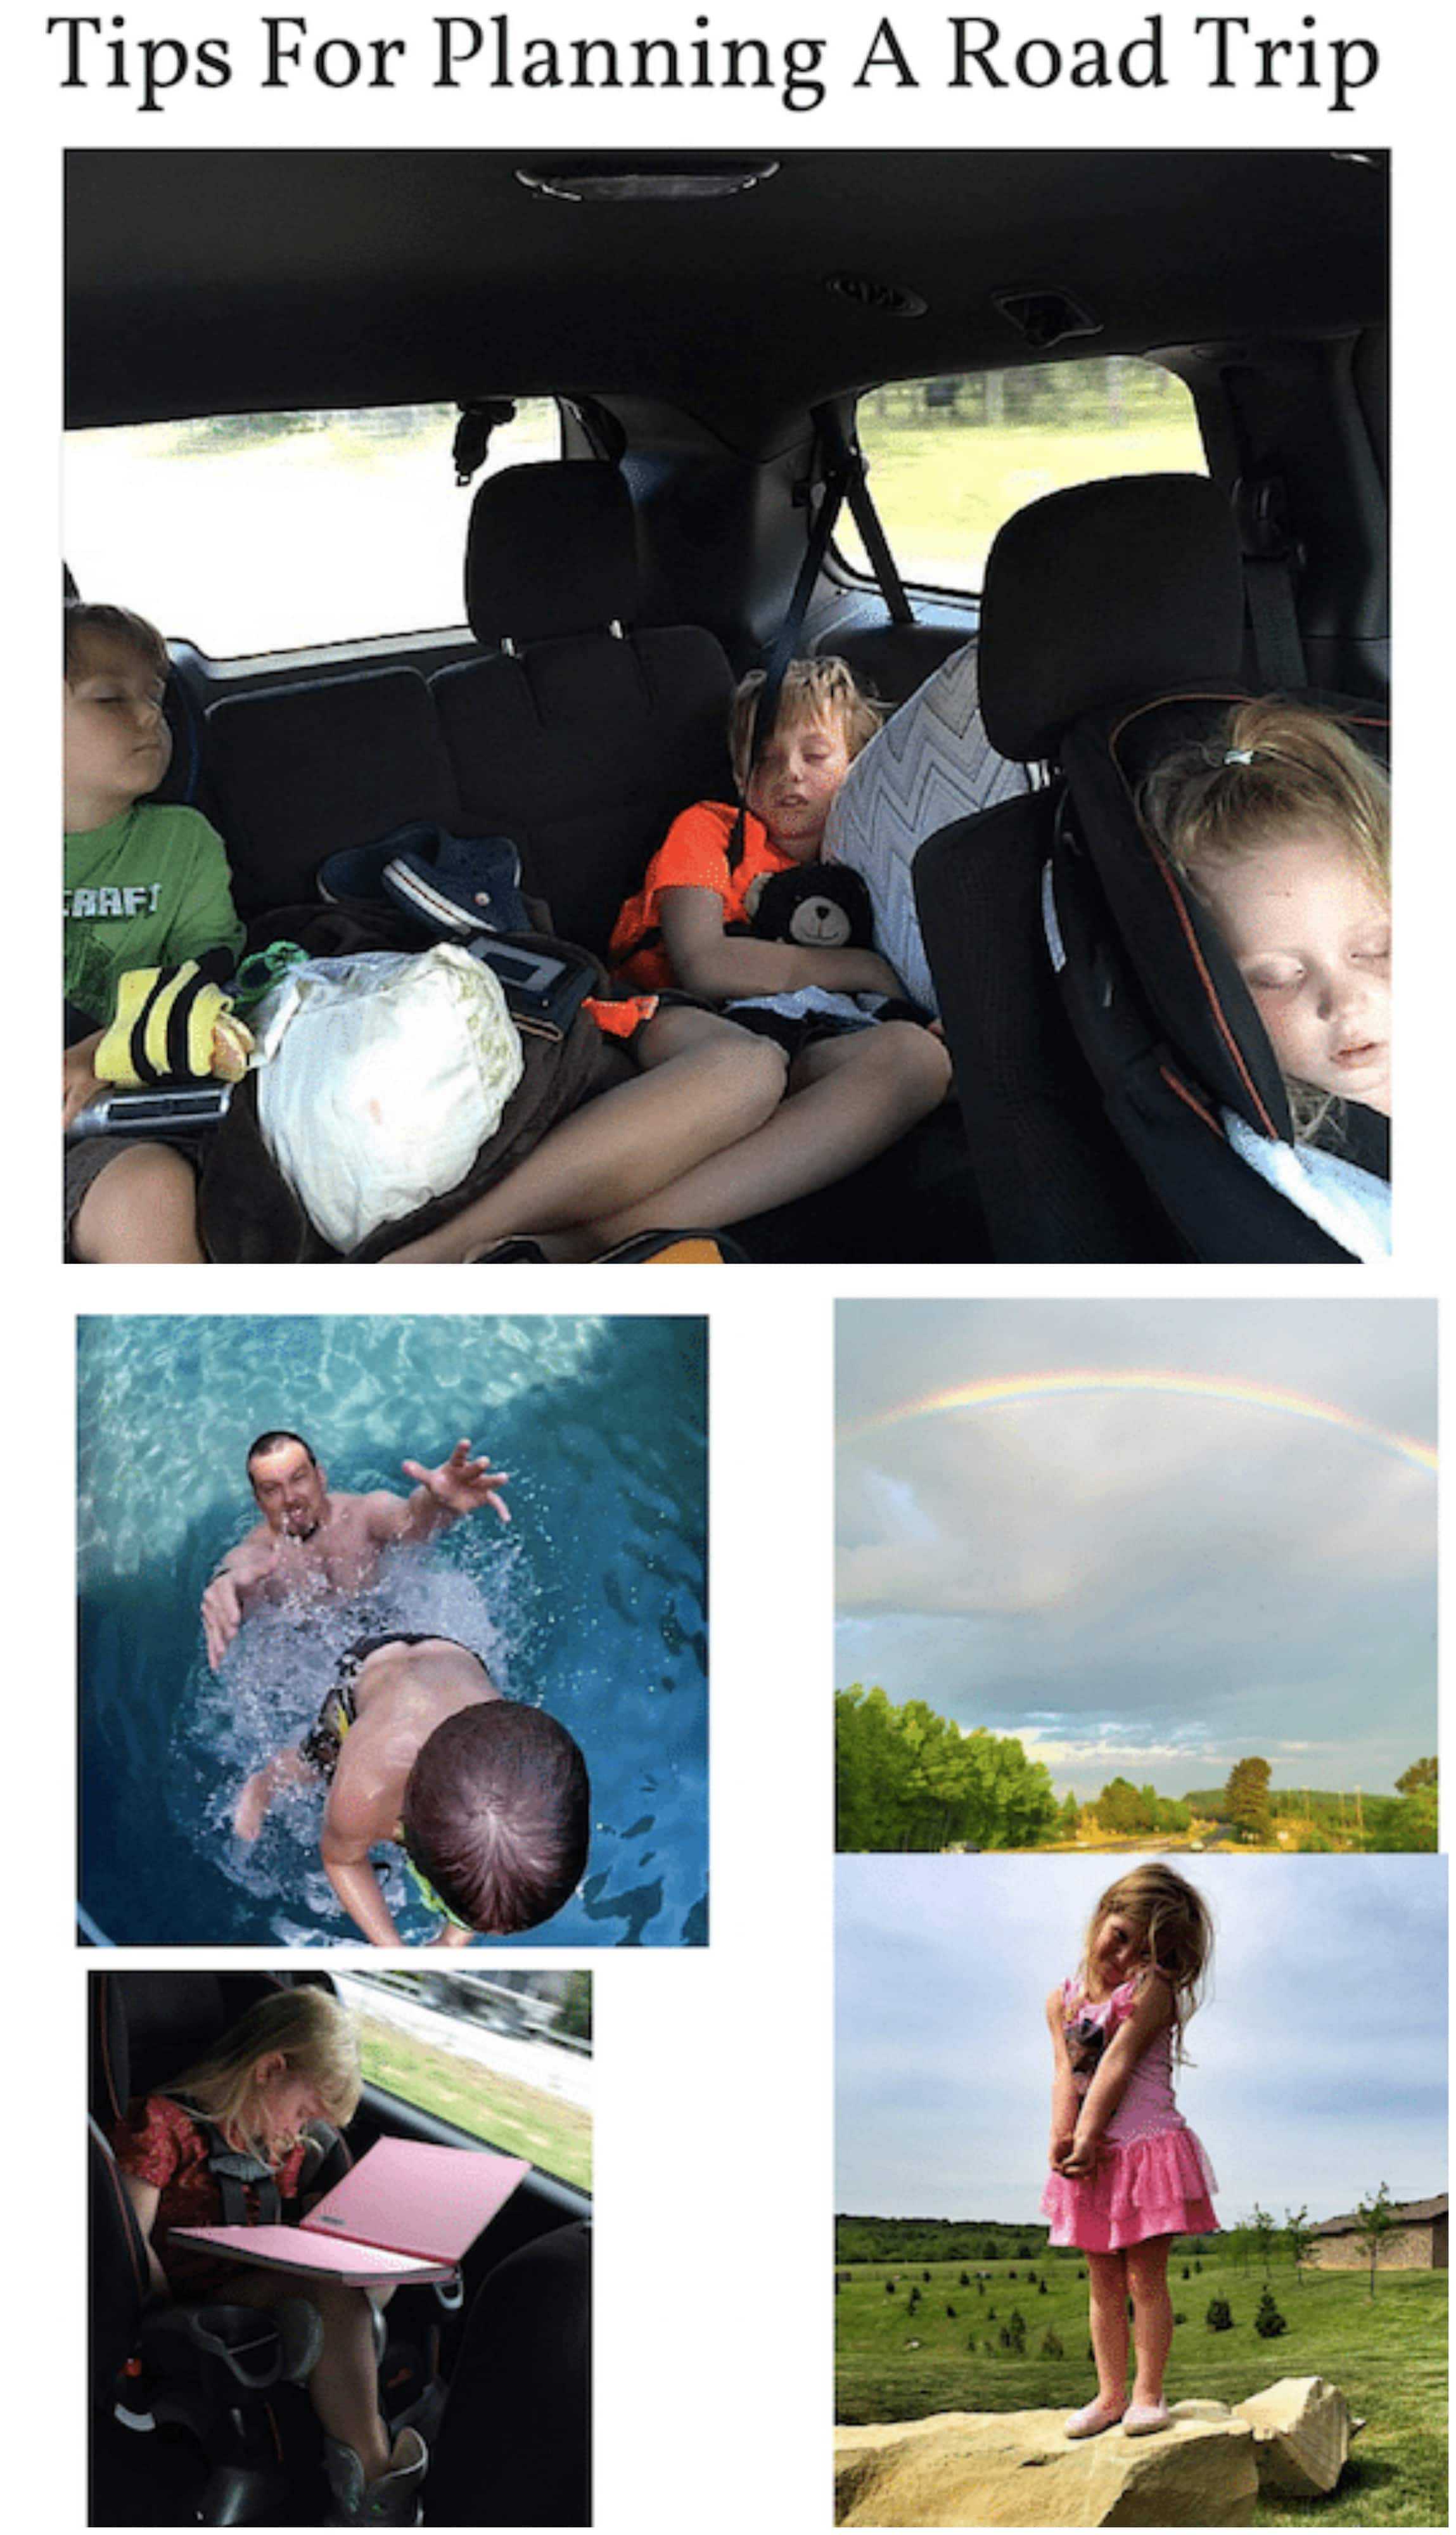 Tips For Planning A Road Trip With Kids